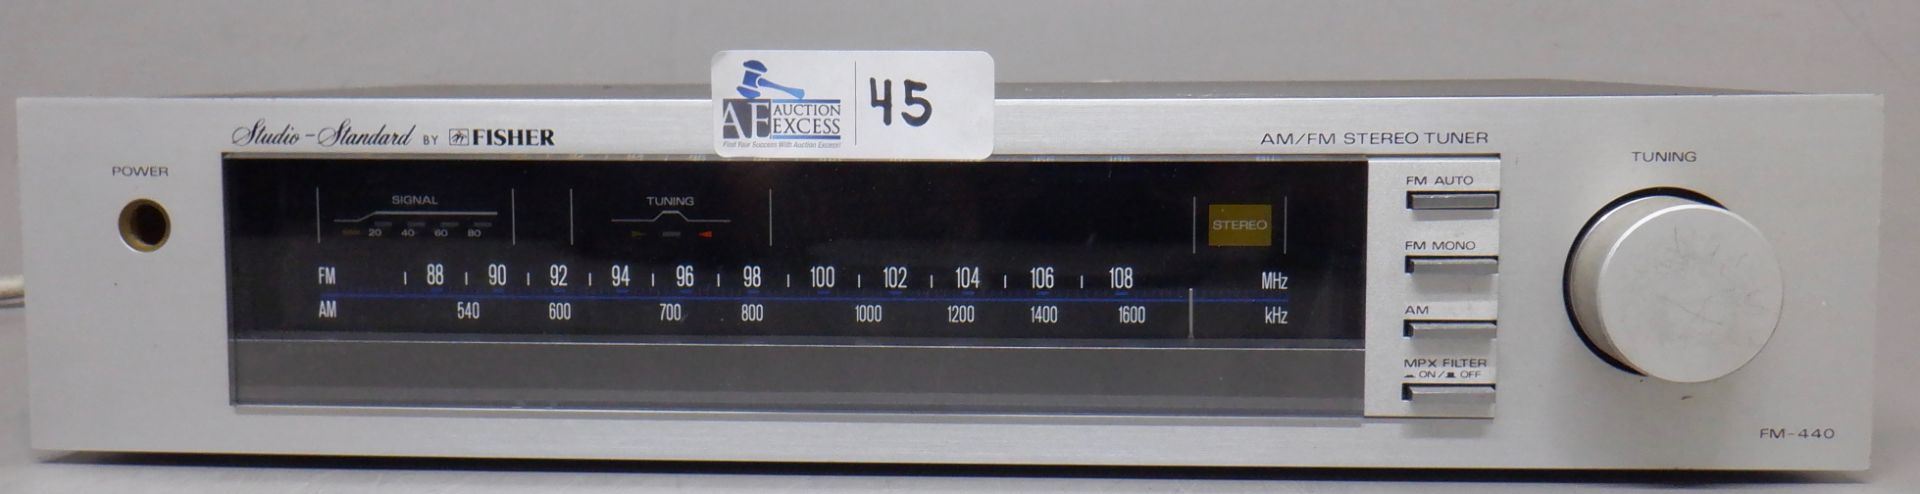 FISHER FM-440 AM/FM STEREO TUNER